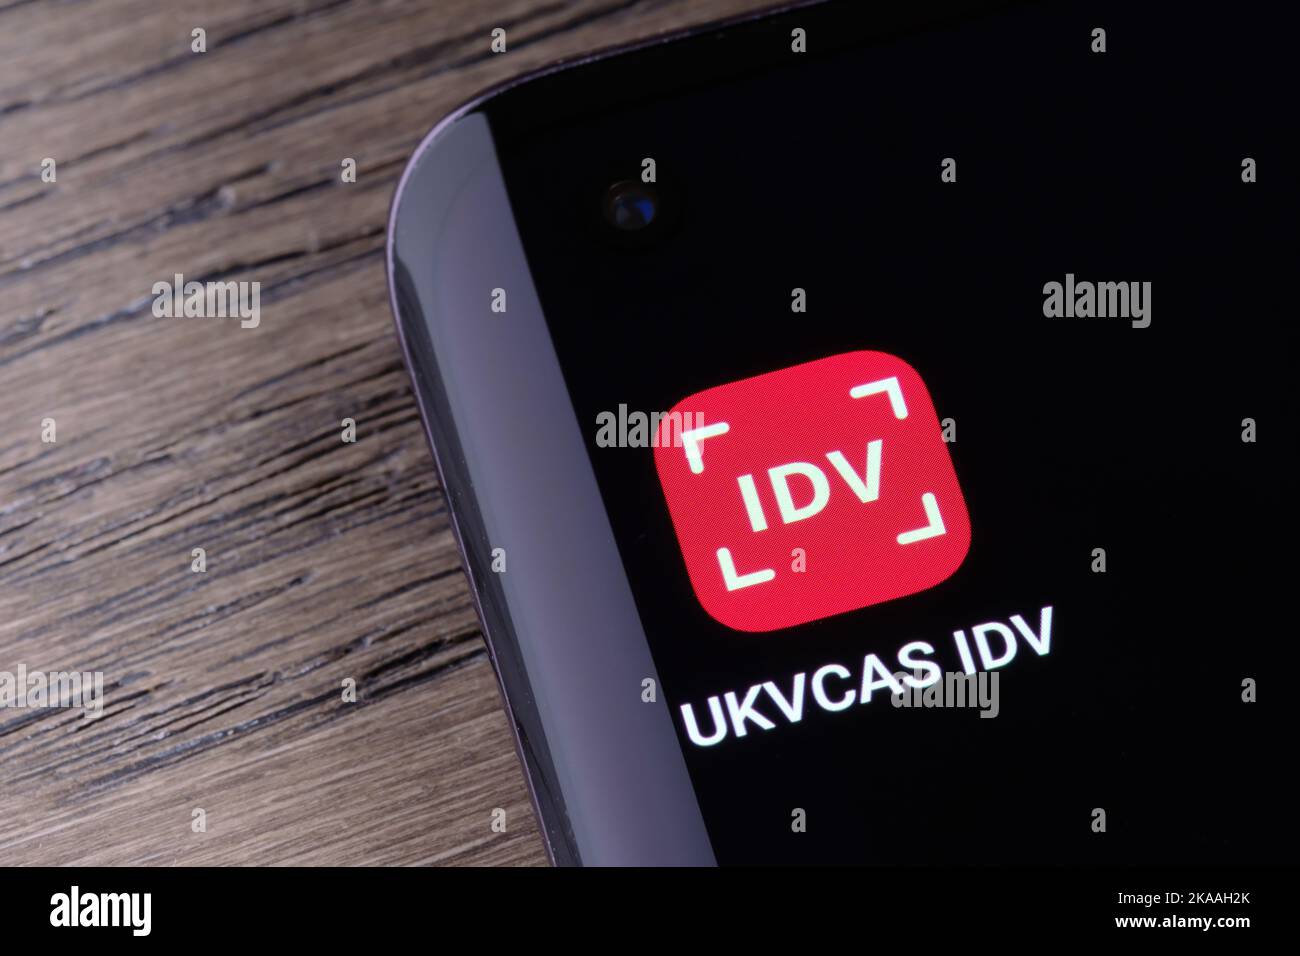 UKVCAS IDV app seen on smartphone. UK Visa and Citizenship Application Services app for Identity Verification and submitting visa documents. Stafford, Stock Photo